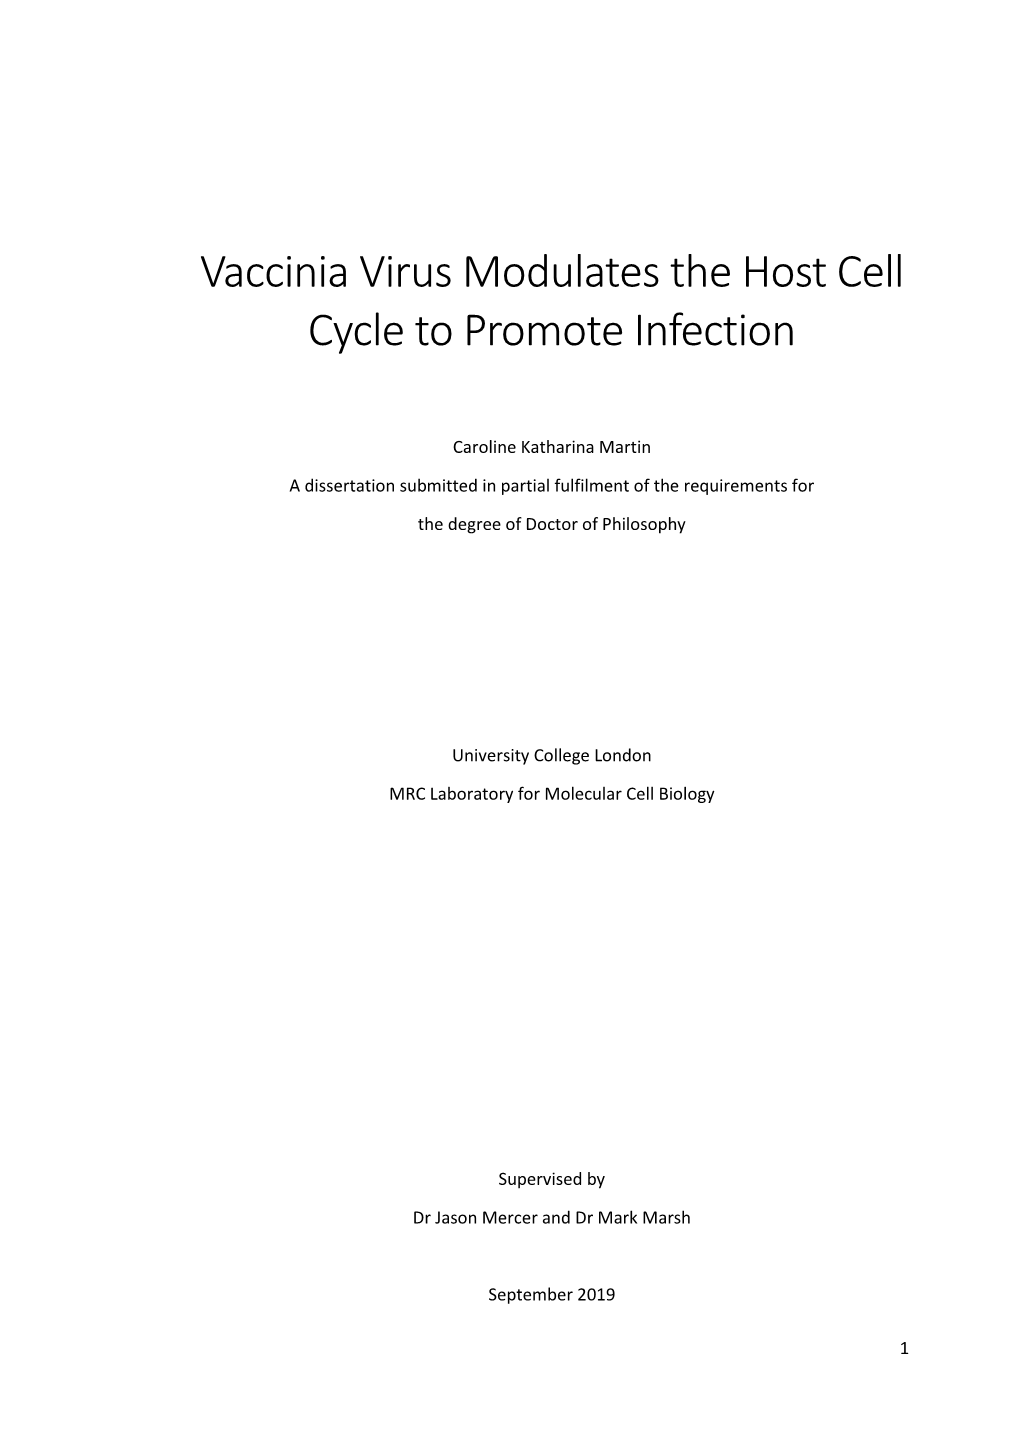 Vaccinia Virus Modulates the Host Cell Cycle to Promote Infection